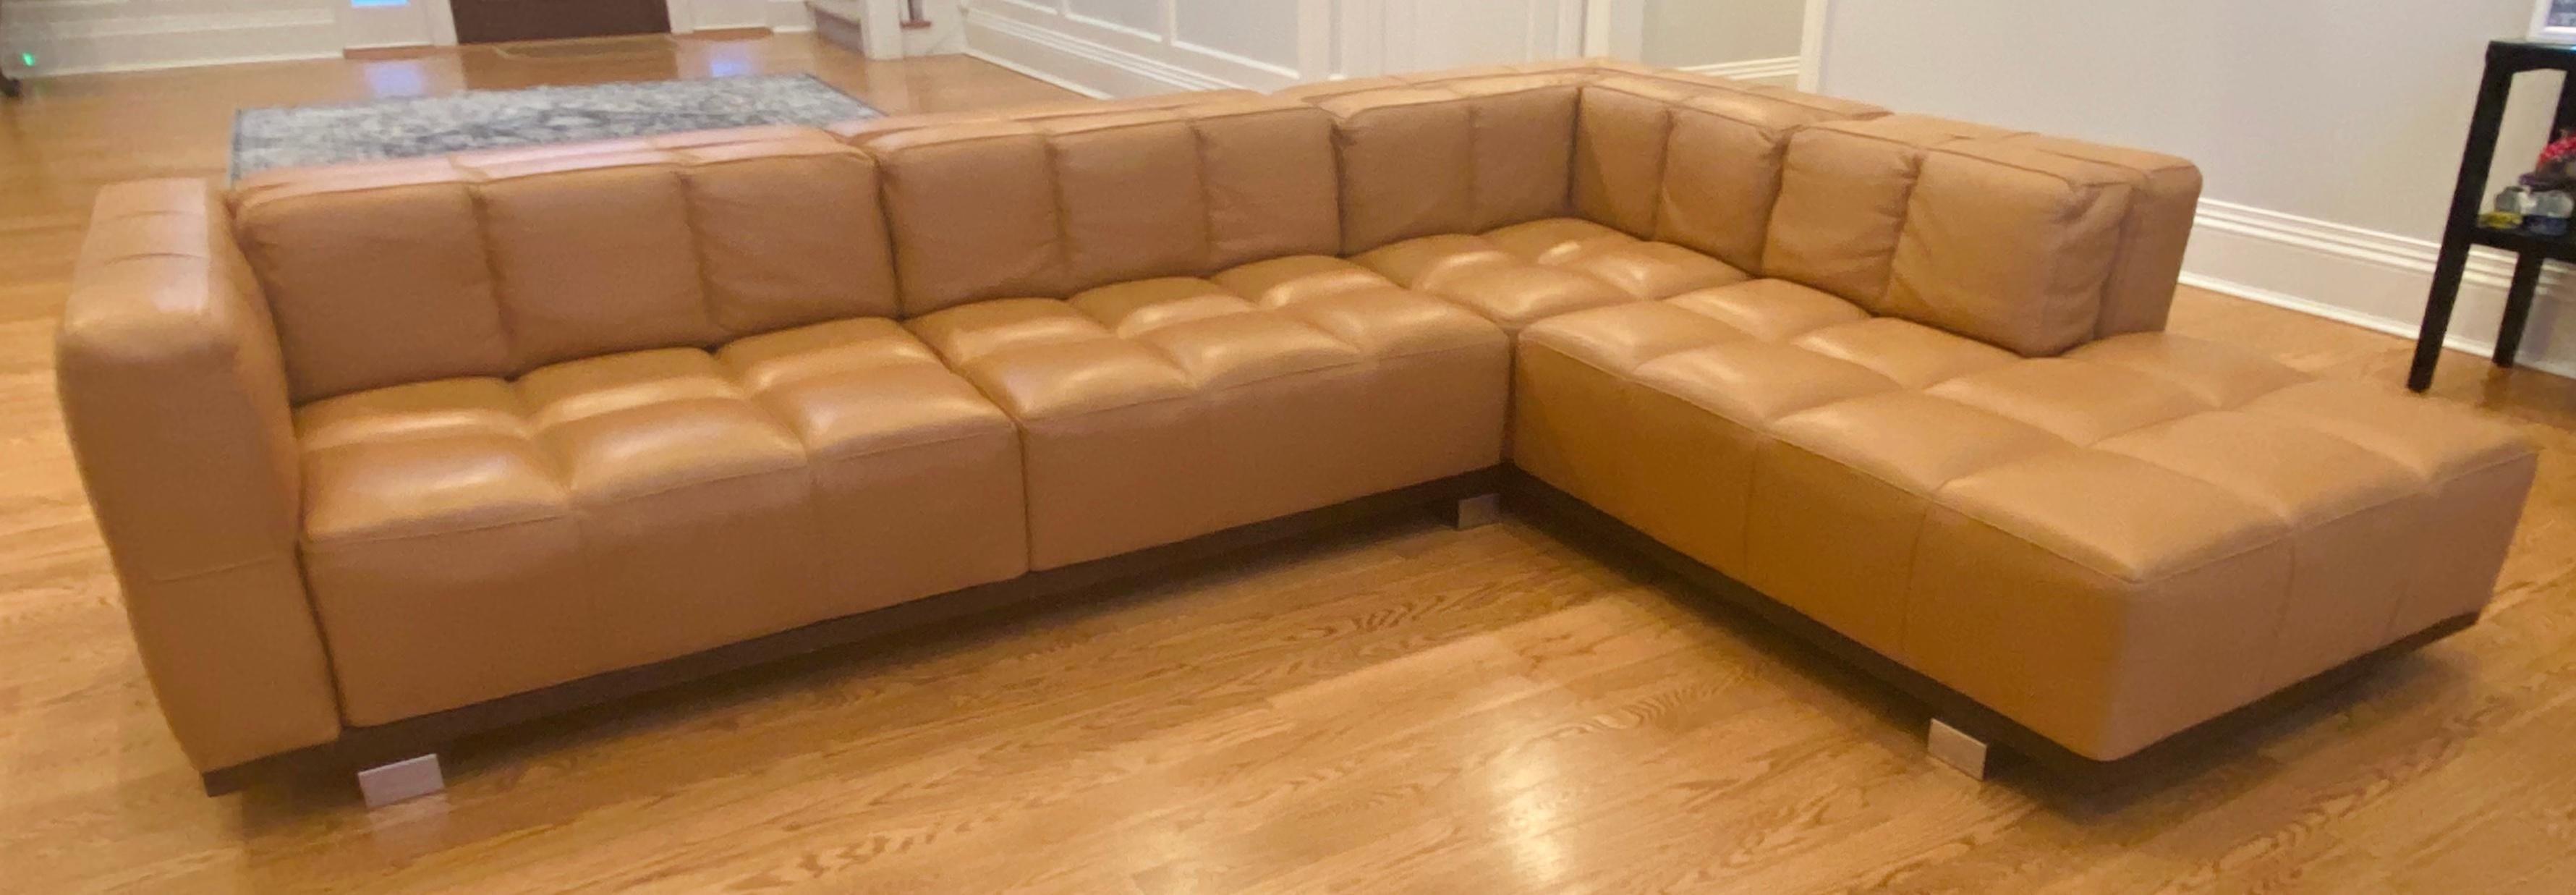 An elegant and stylish sectional soft leather sofa by Roche Bobois ( French, founded 1950) in a fabulous tan or light brown color. The two-piece sofa has a corner composition and a chaise end. The cushions are down filled and are marked Roche Bobois